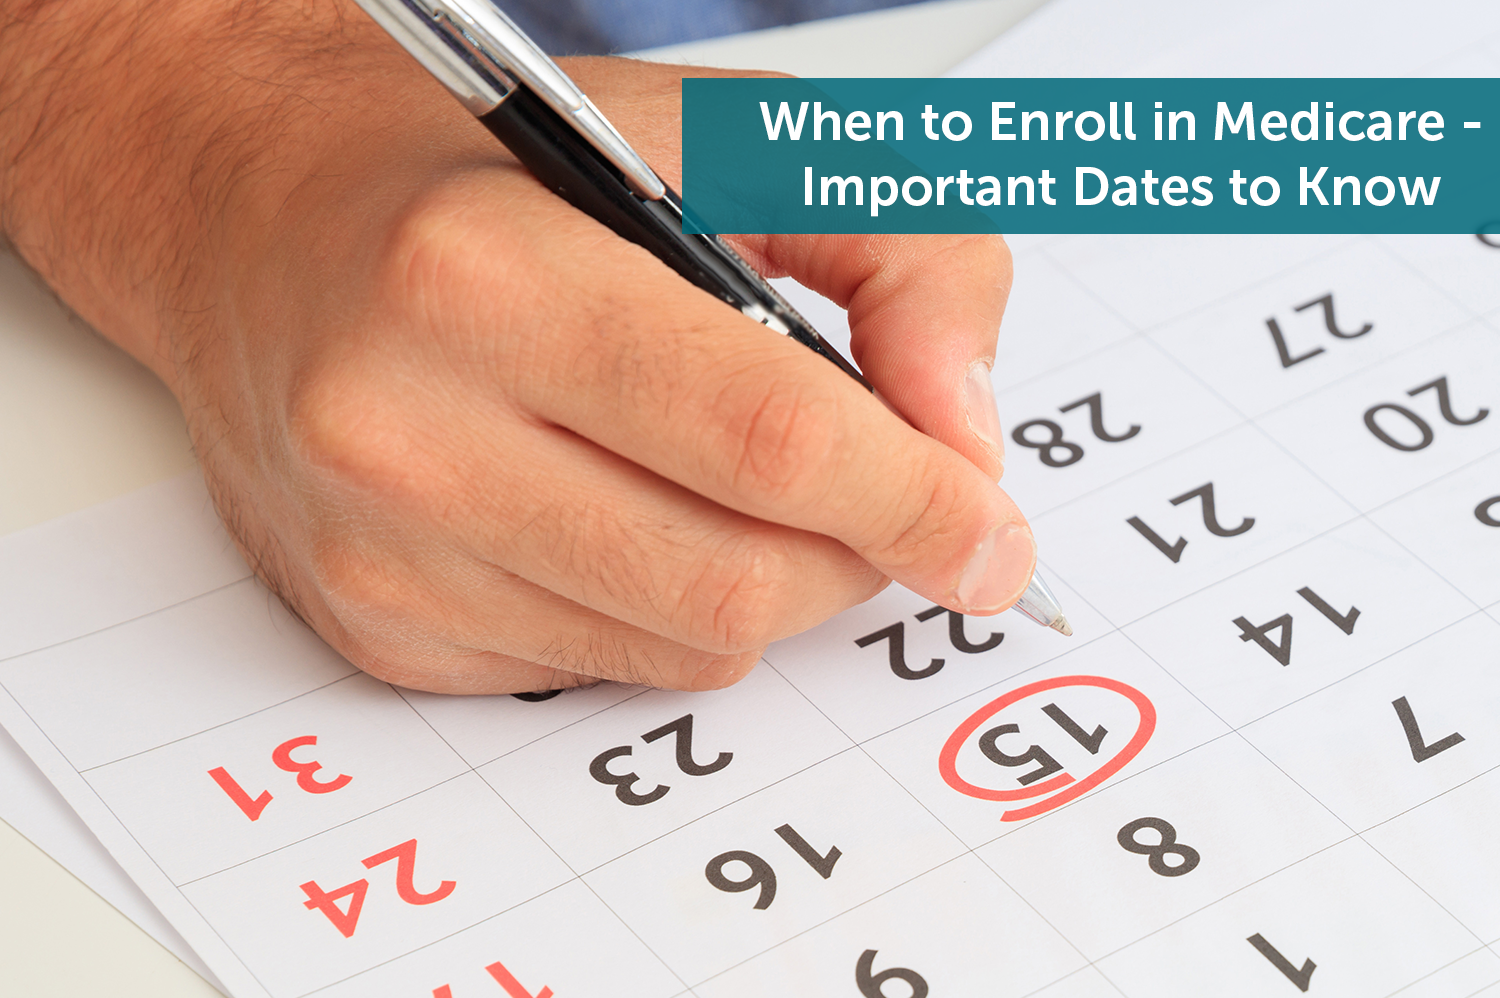 An anonymous person circling a date on a calendar with a red pen - for them, it's to remember when to enroll in Medicare.